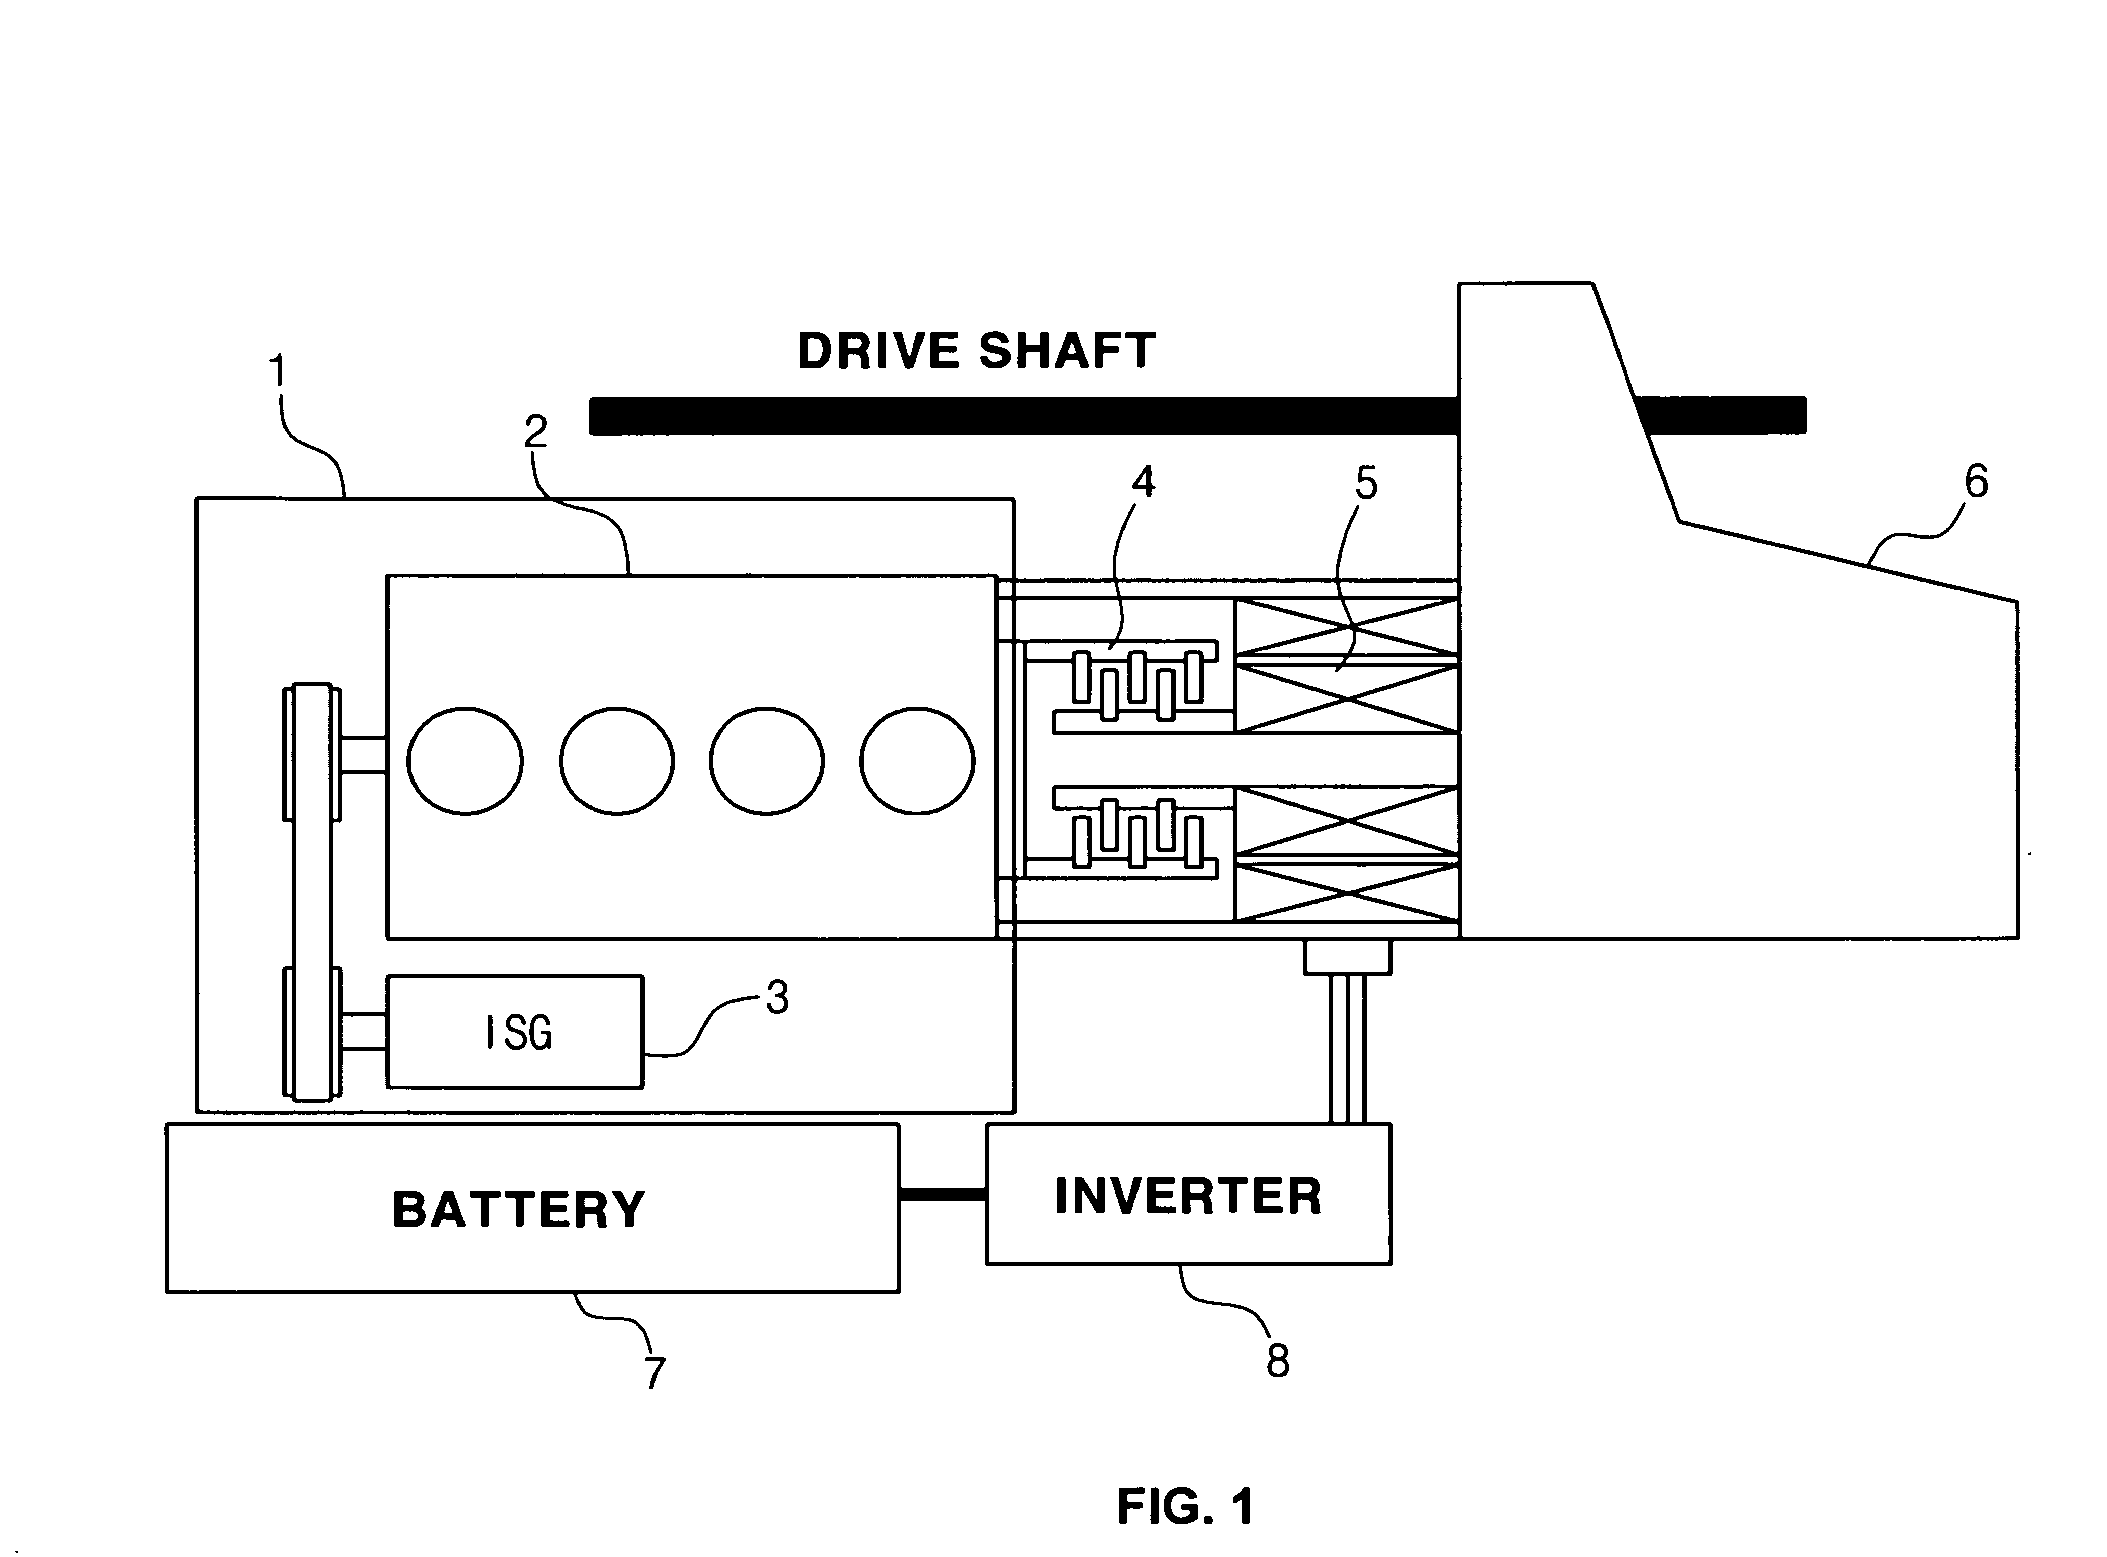 Clutch torque control system of hybrid electric vehicle